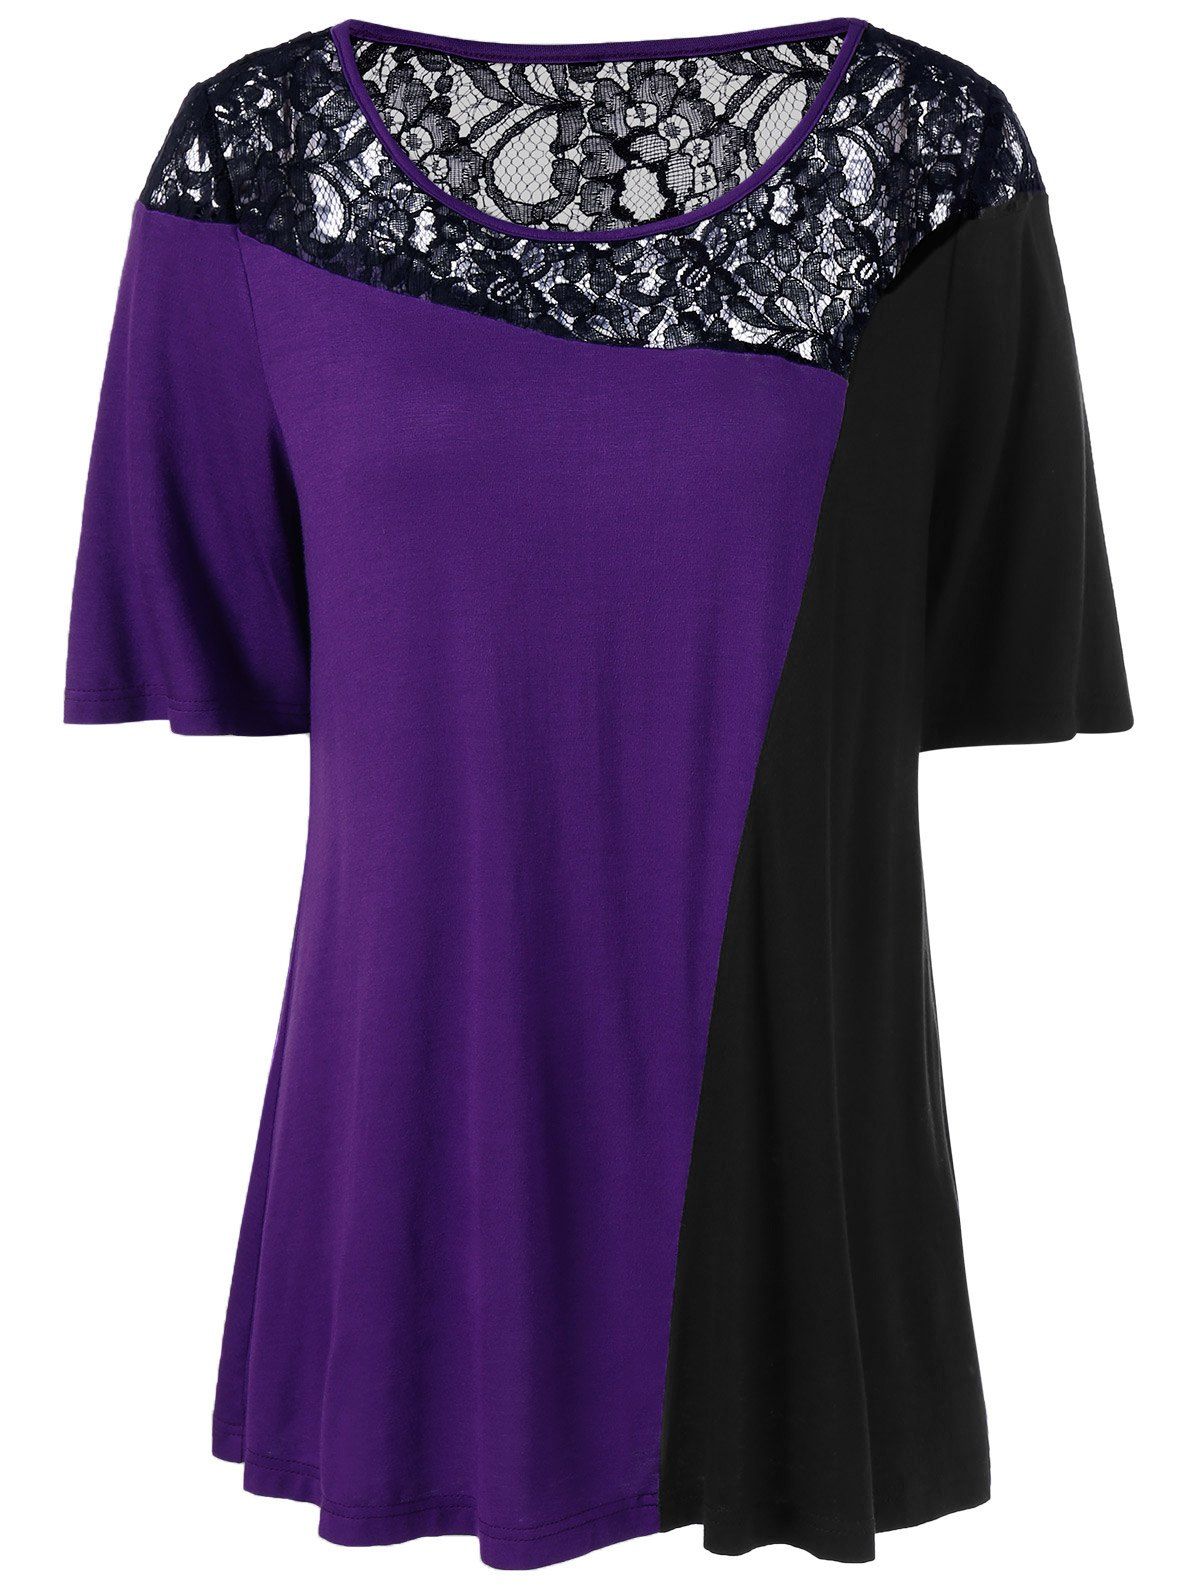 [17% OFF] 2021 Plus Size Lace Panel Two Tone T-Shirt In BLACK/PURPLE ...